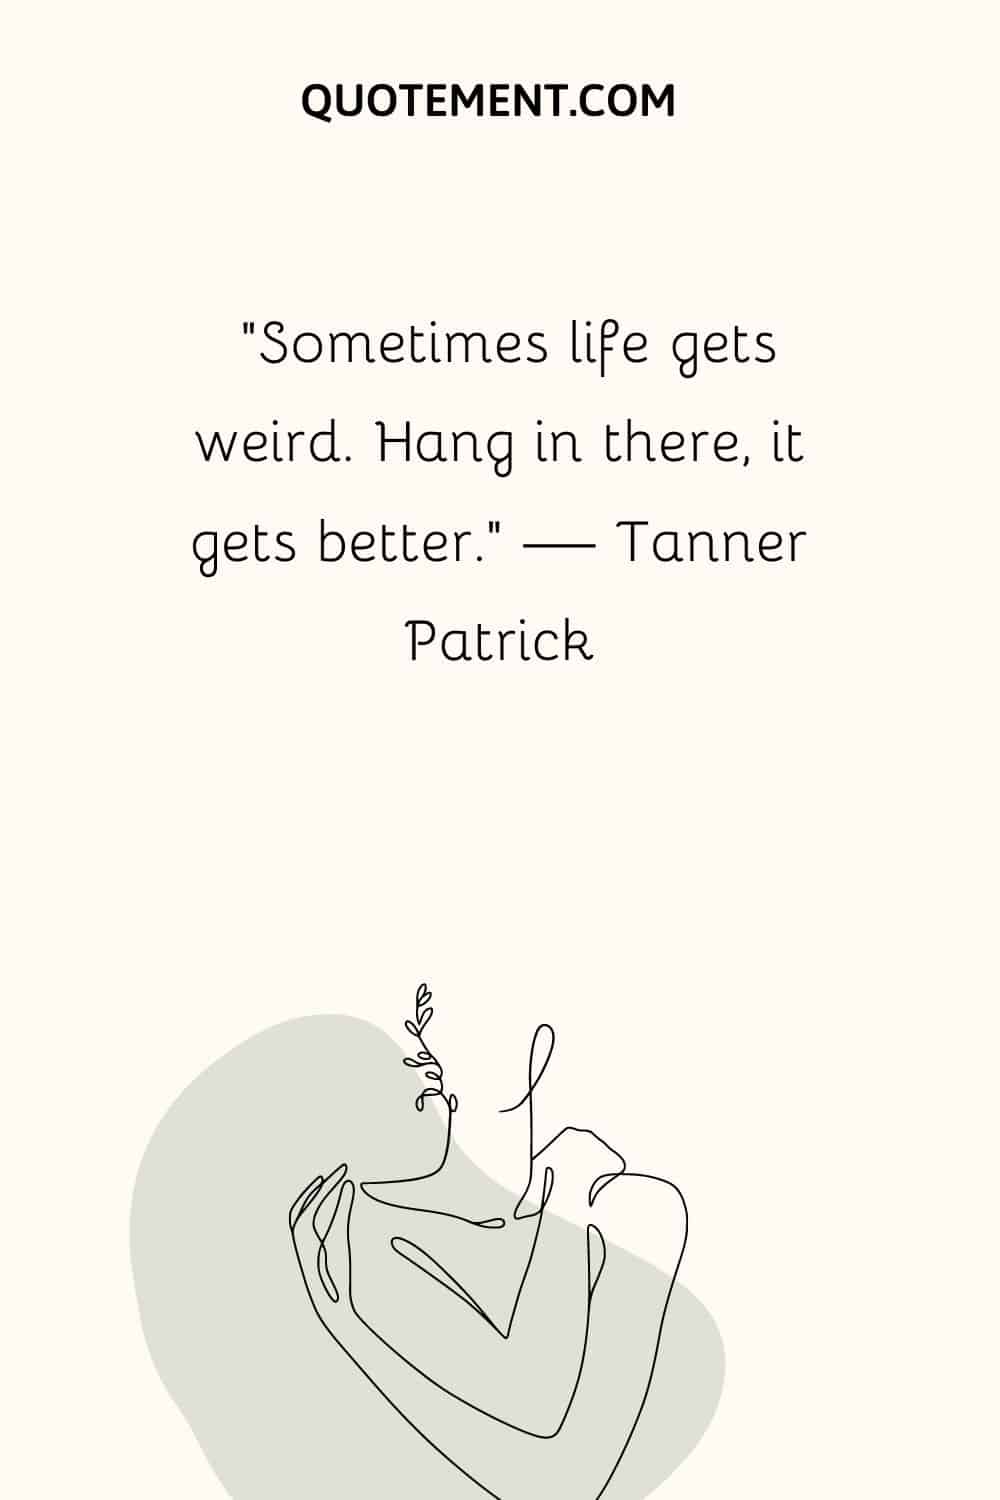 “Sometimes life gets weird. Hang in there, it gets better.” — Tanner Patrick